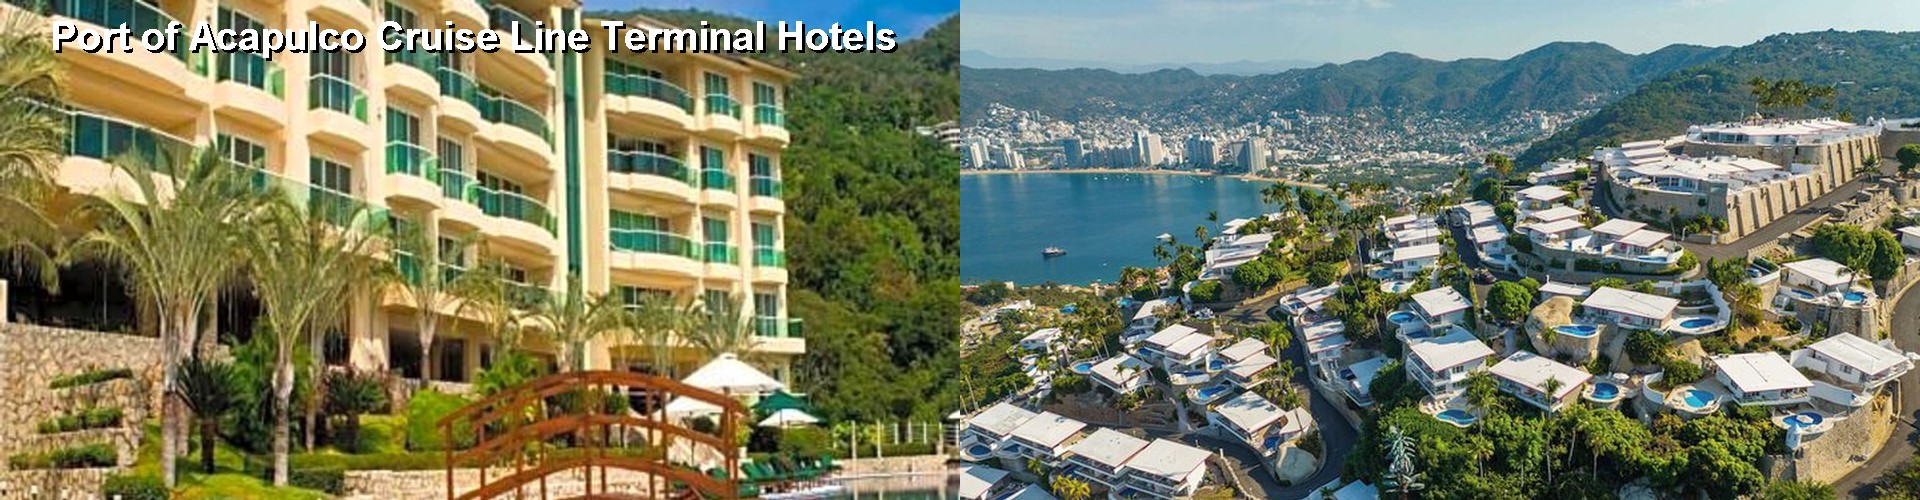 5 Best Hotels near Port of Acapulco Cruise Line Terminal